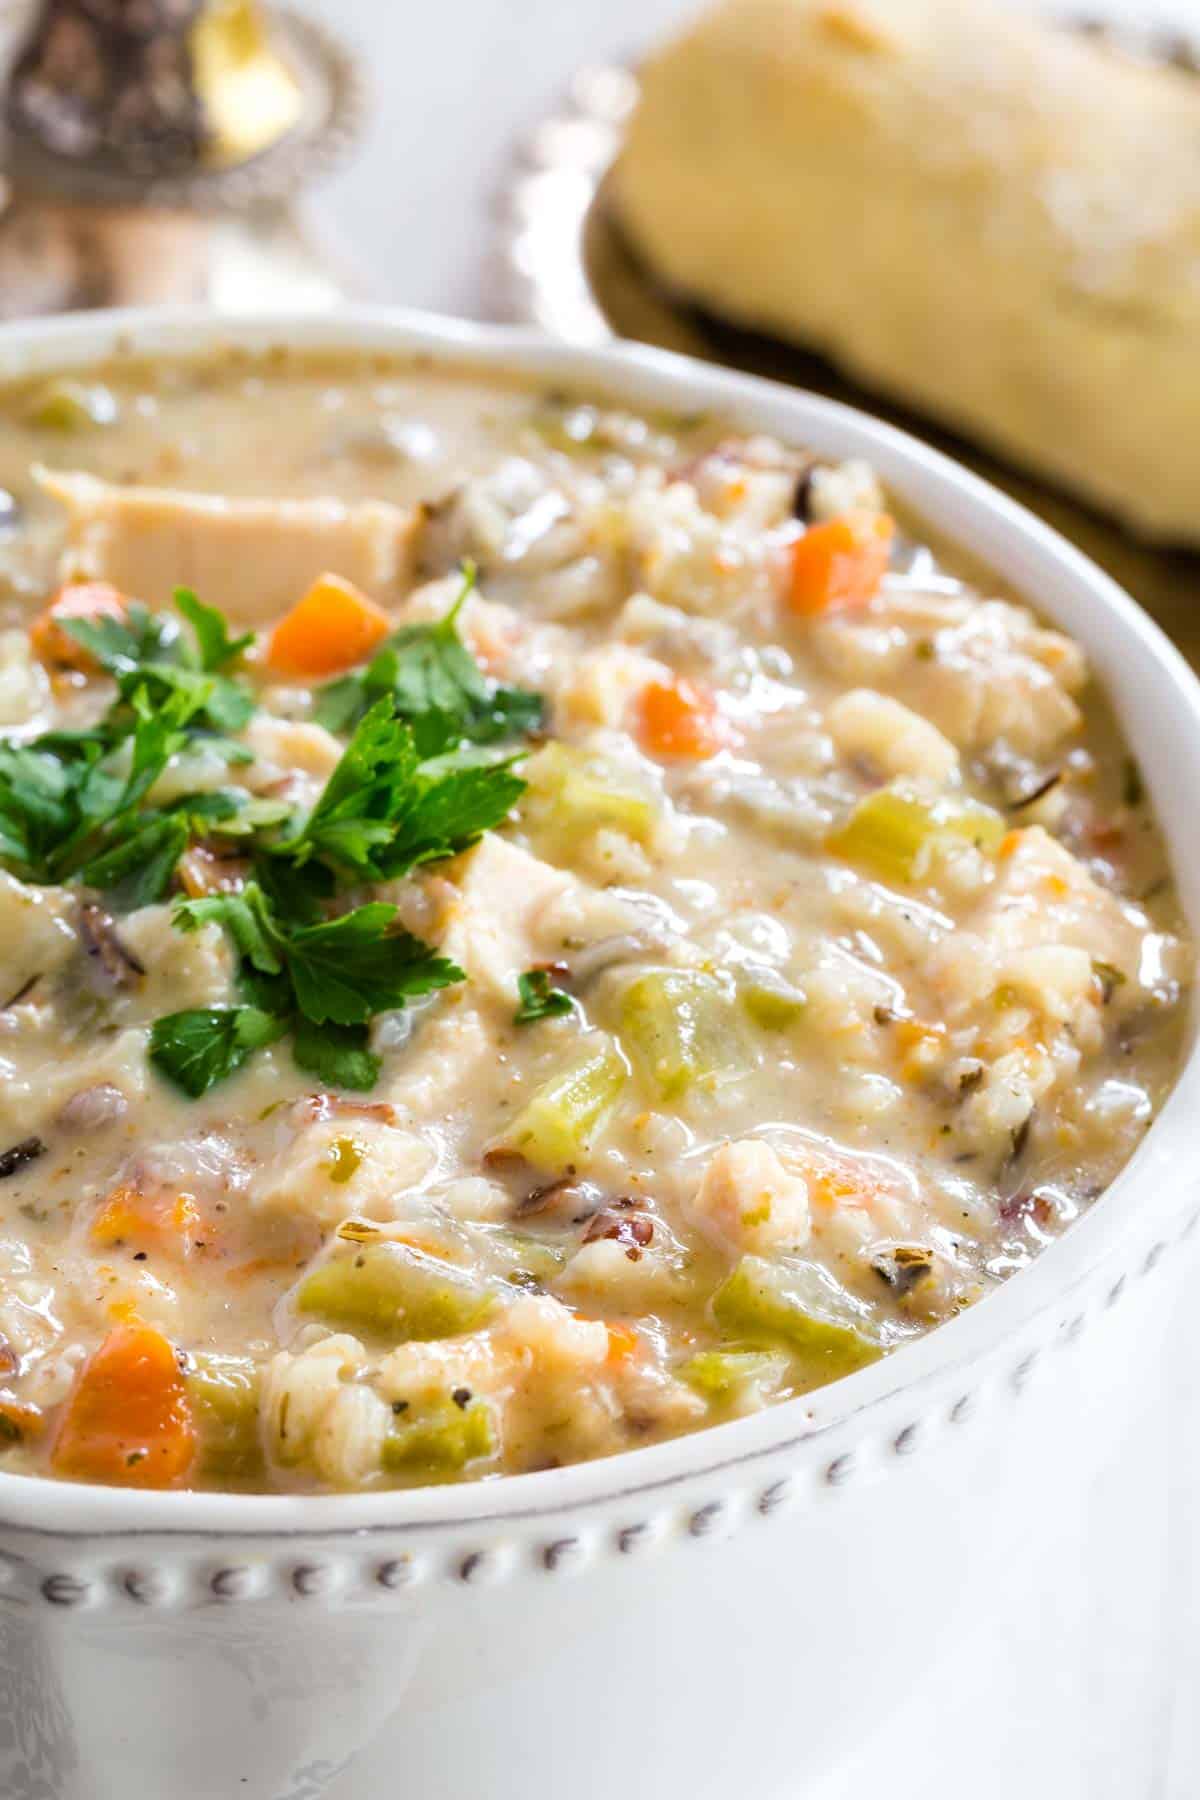 Satisfying and Delicious: Gluten-Free Soup Recipes to Warm Your Soul